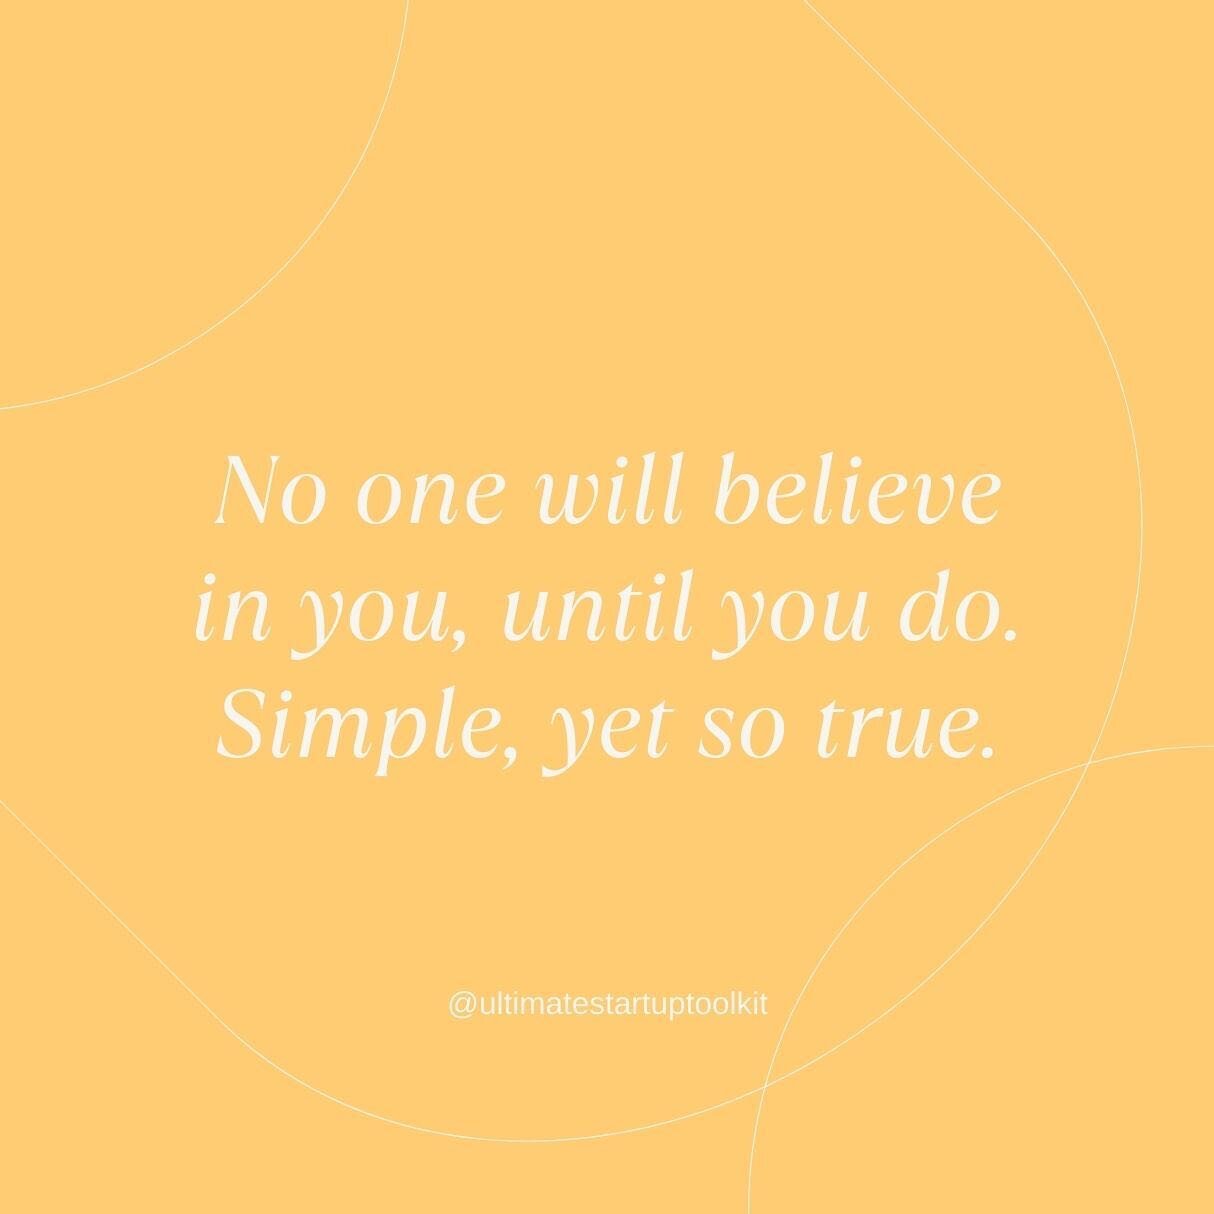 As entrepreneurs, we often believe we need to gain the validation of others outside of ourselves before we can fully believe in ourselves, yet &ldquo;no one will believe in you, unless you believe in you first&rdquo;. Generating deep self belief can 